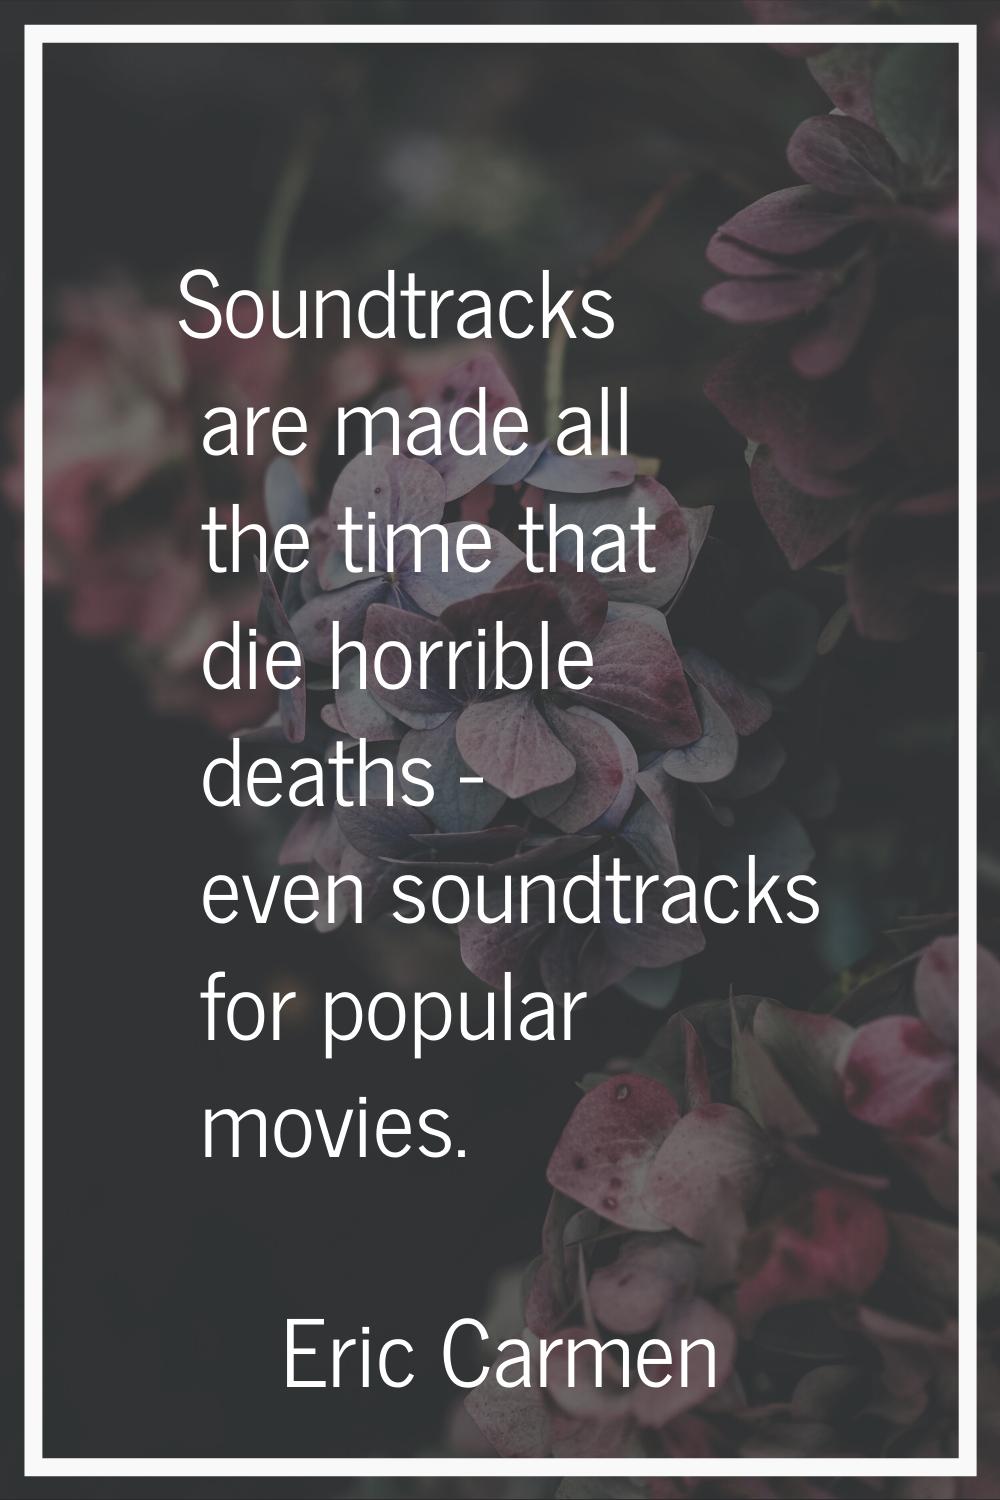 Soundtracks are made all the time that die horrible deaths - even soundtracks for popular movies.